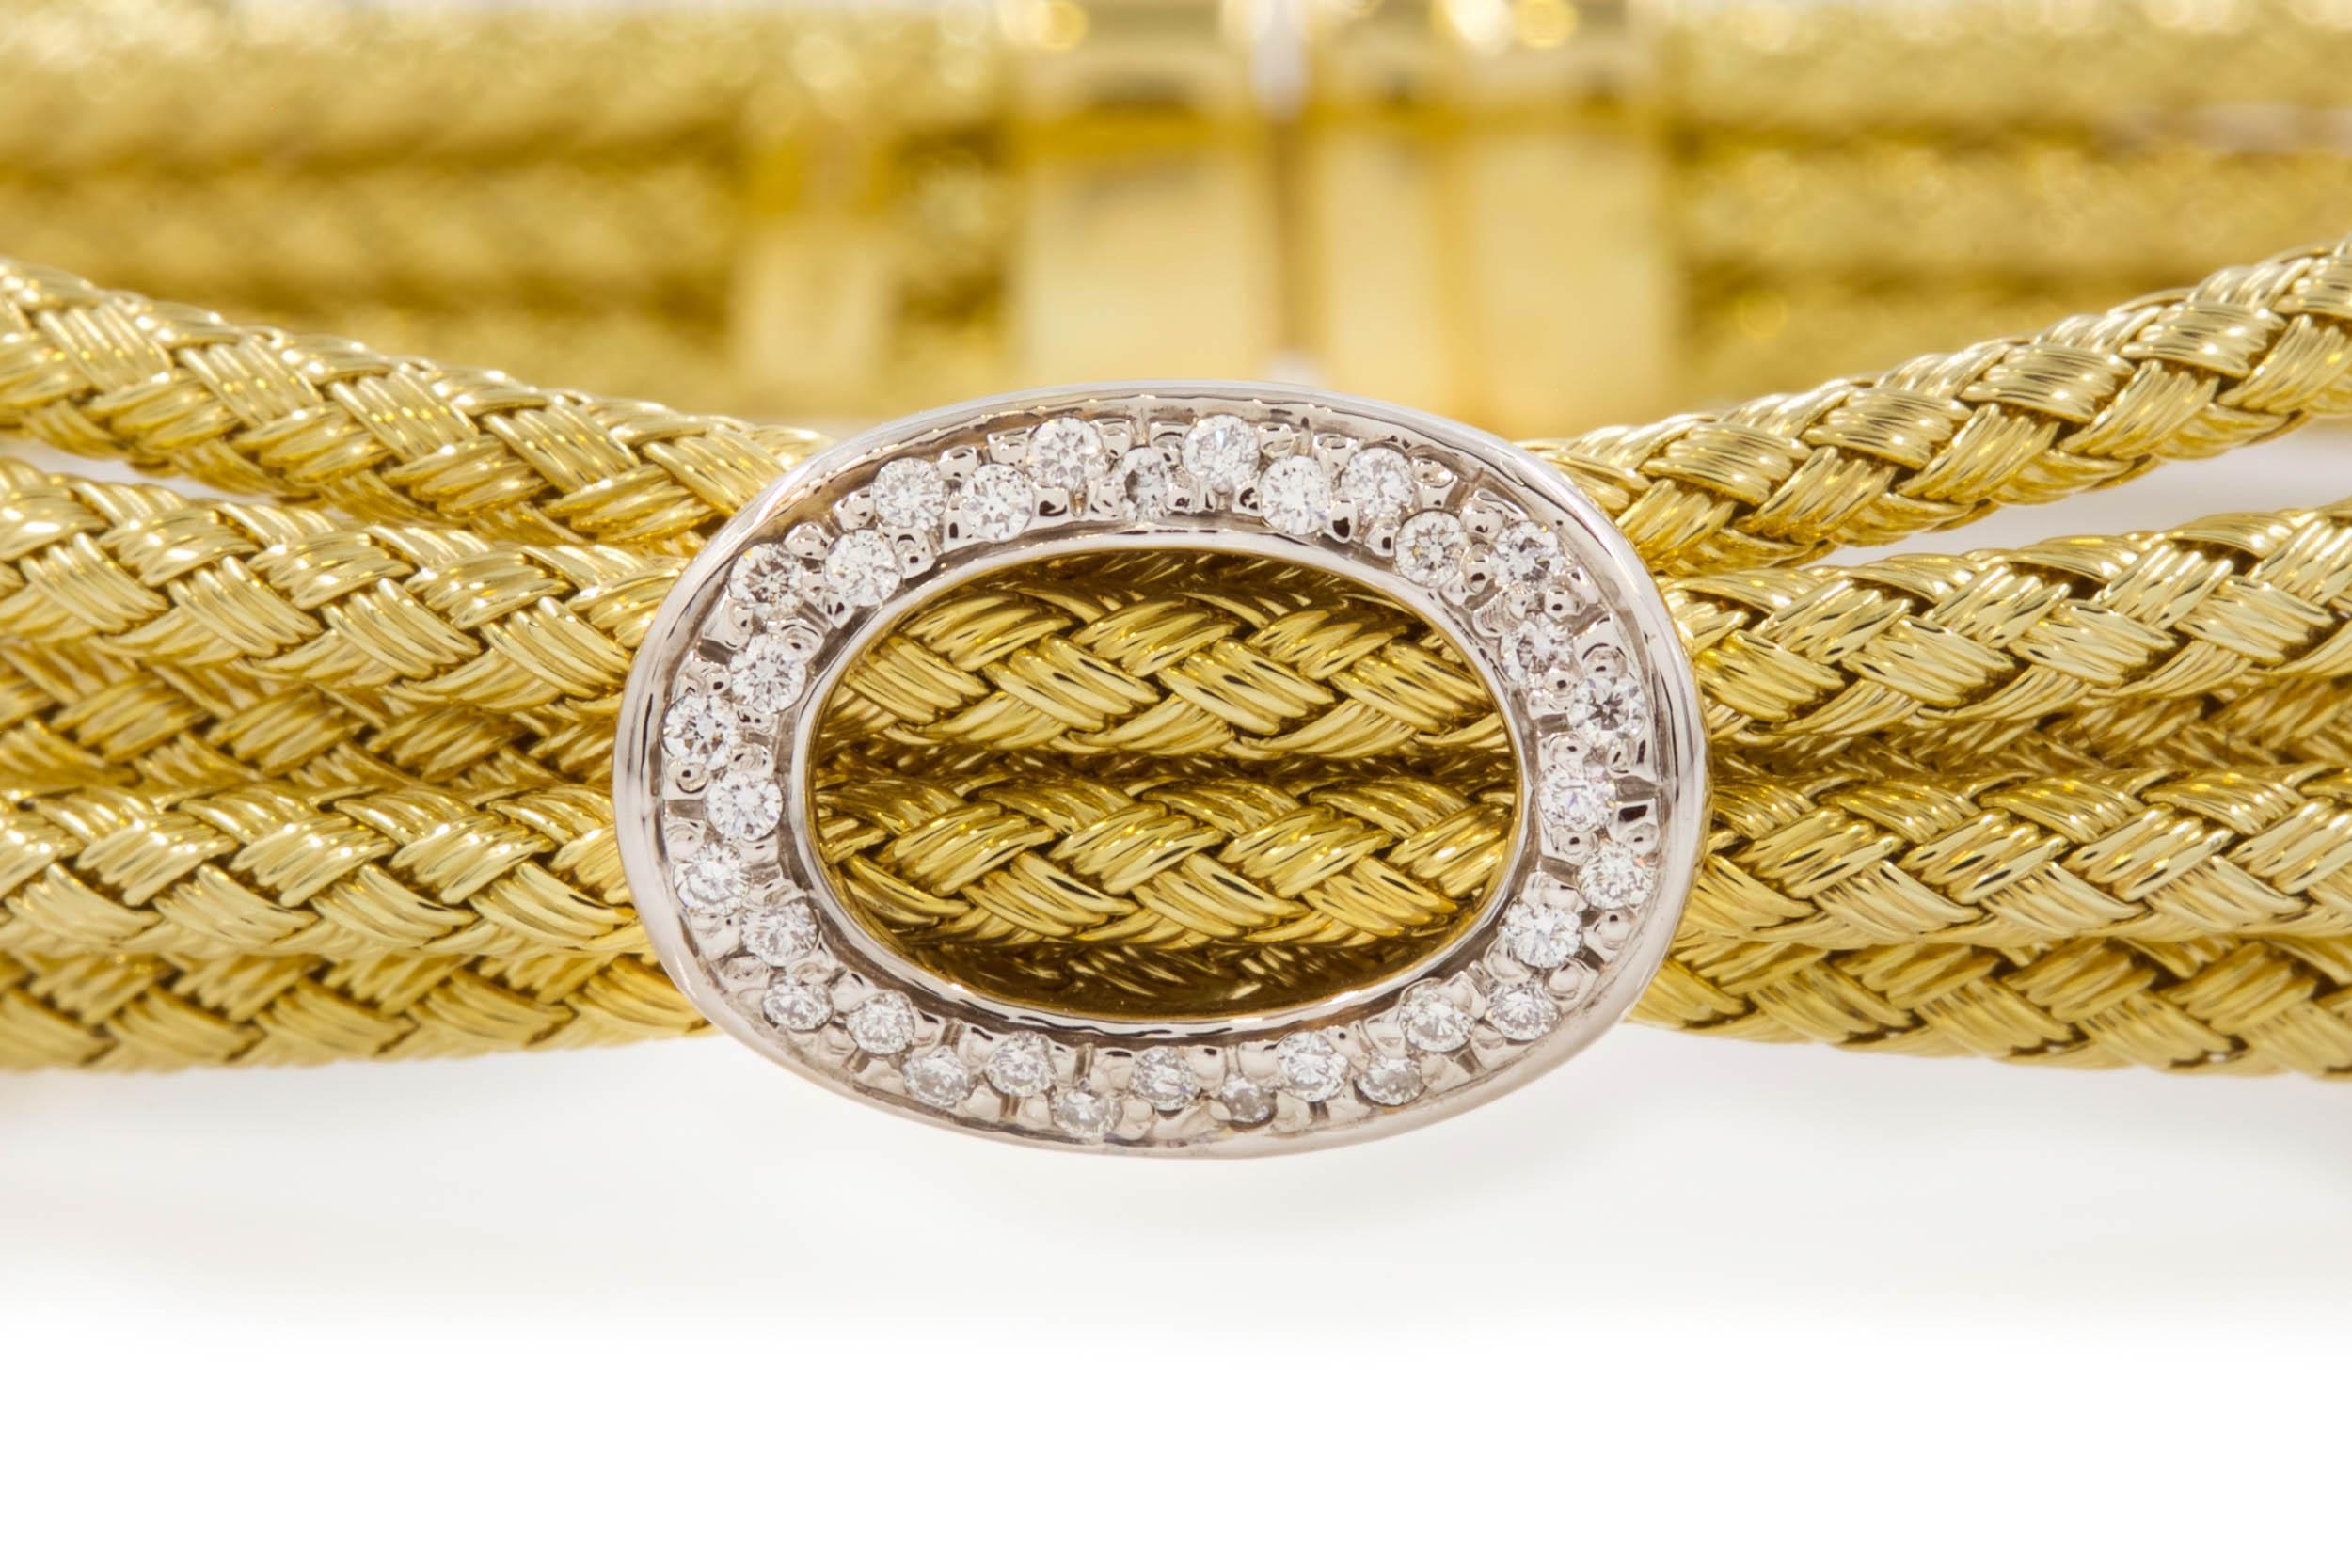 ESTATE ITALIAN 14K YELLOW GOLD FIVE-CABLE BRACELET
With circular white gold motif set with 32 diamonds; 27.8 grams total weight
Item # C104208 

A gorgeous Italian 14 karat yellow gold five-cable bracelet with a white gold circular motif set with 32